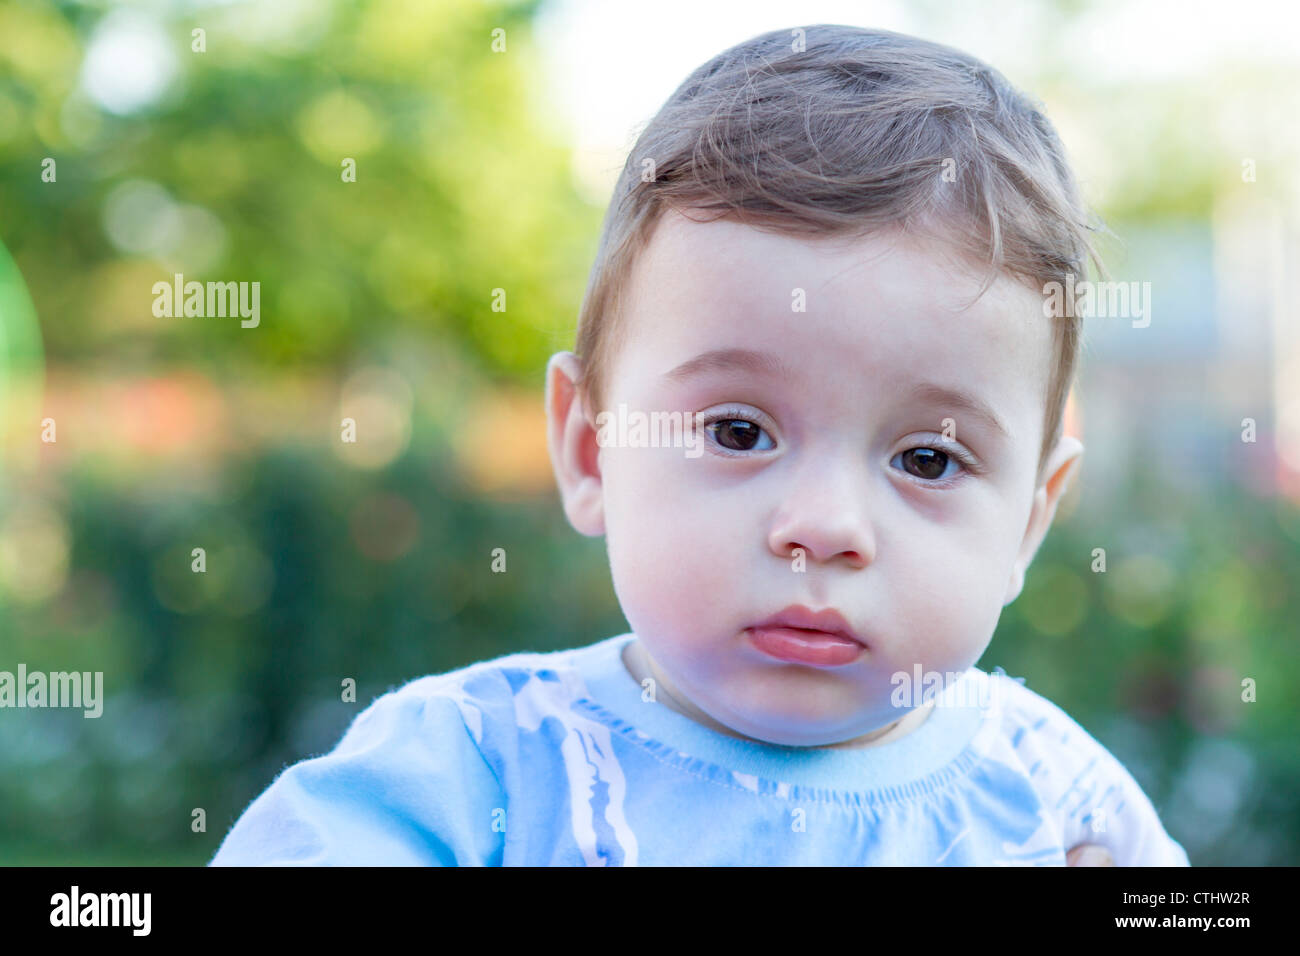 Portrait of a cute little baby boy with innocent eyes. Stock Photo